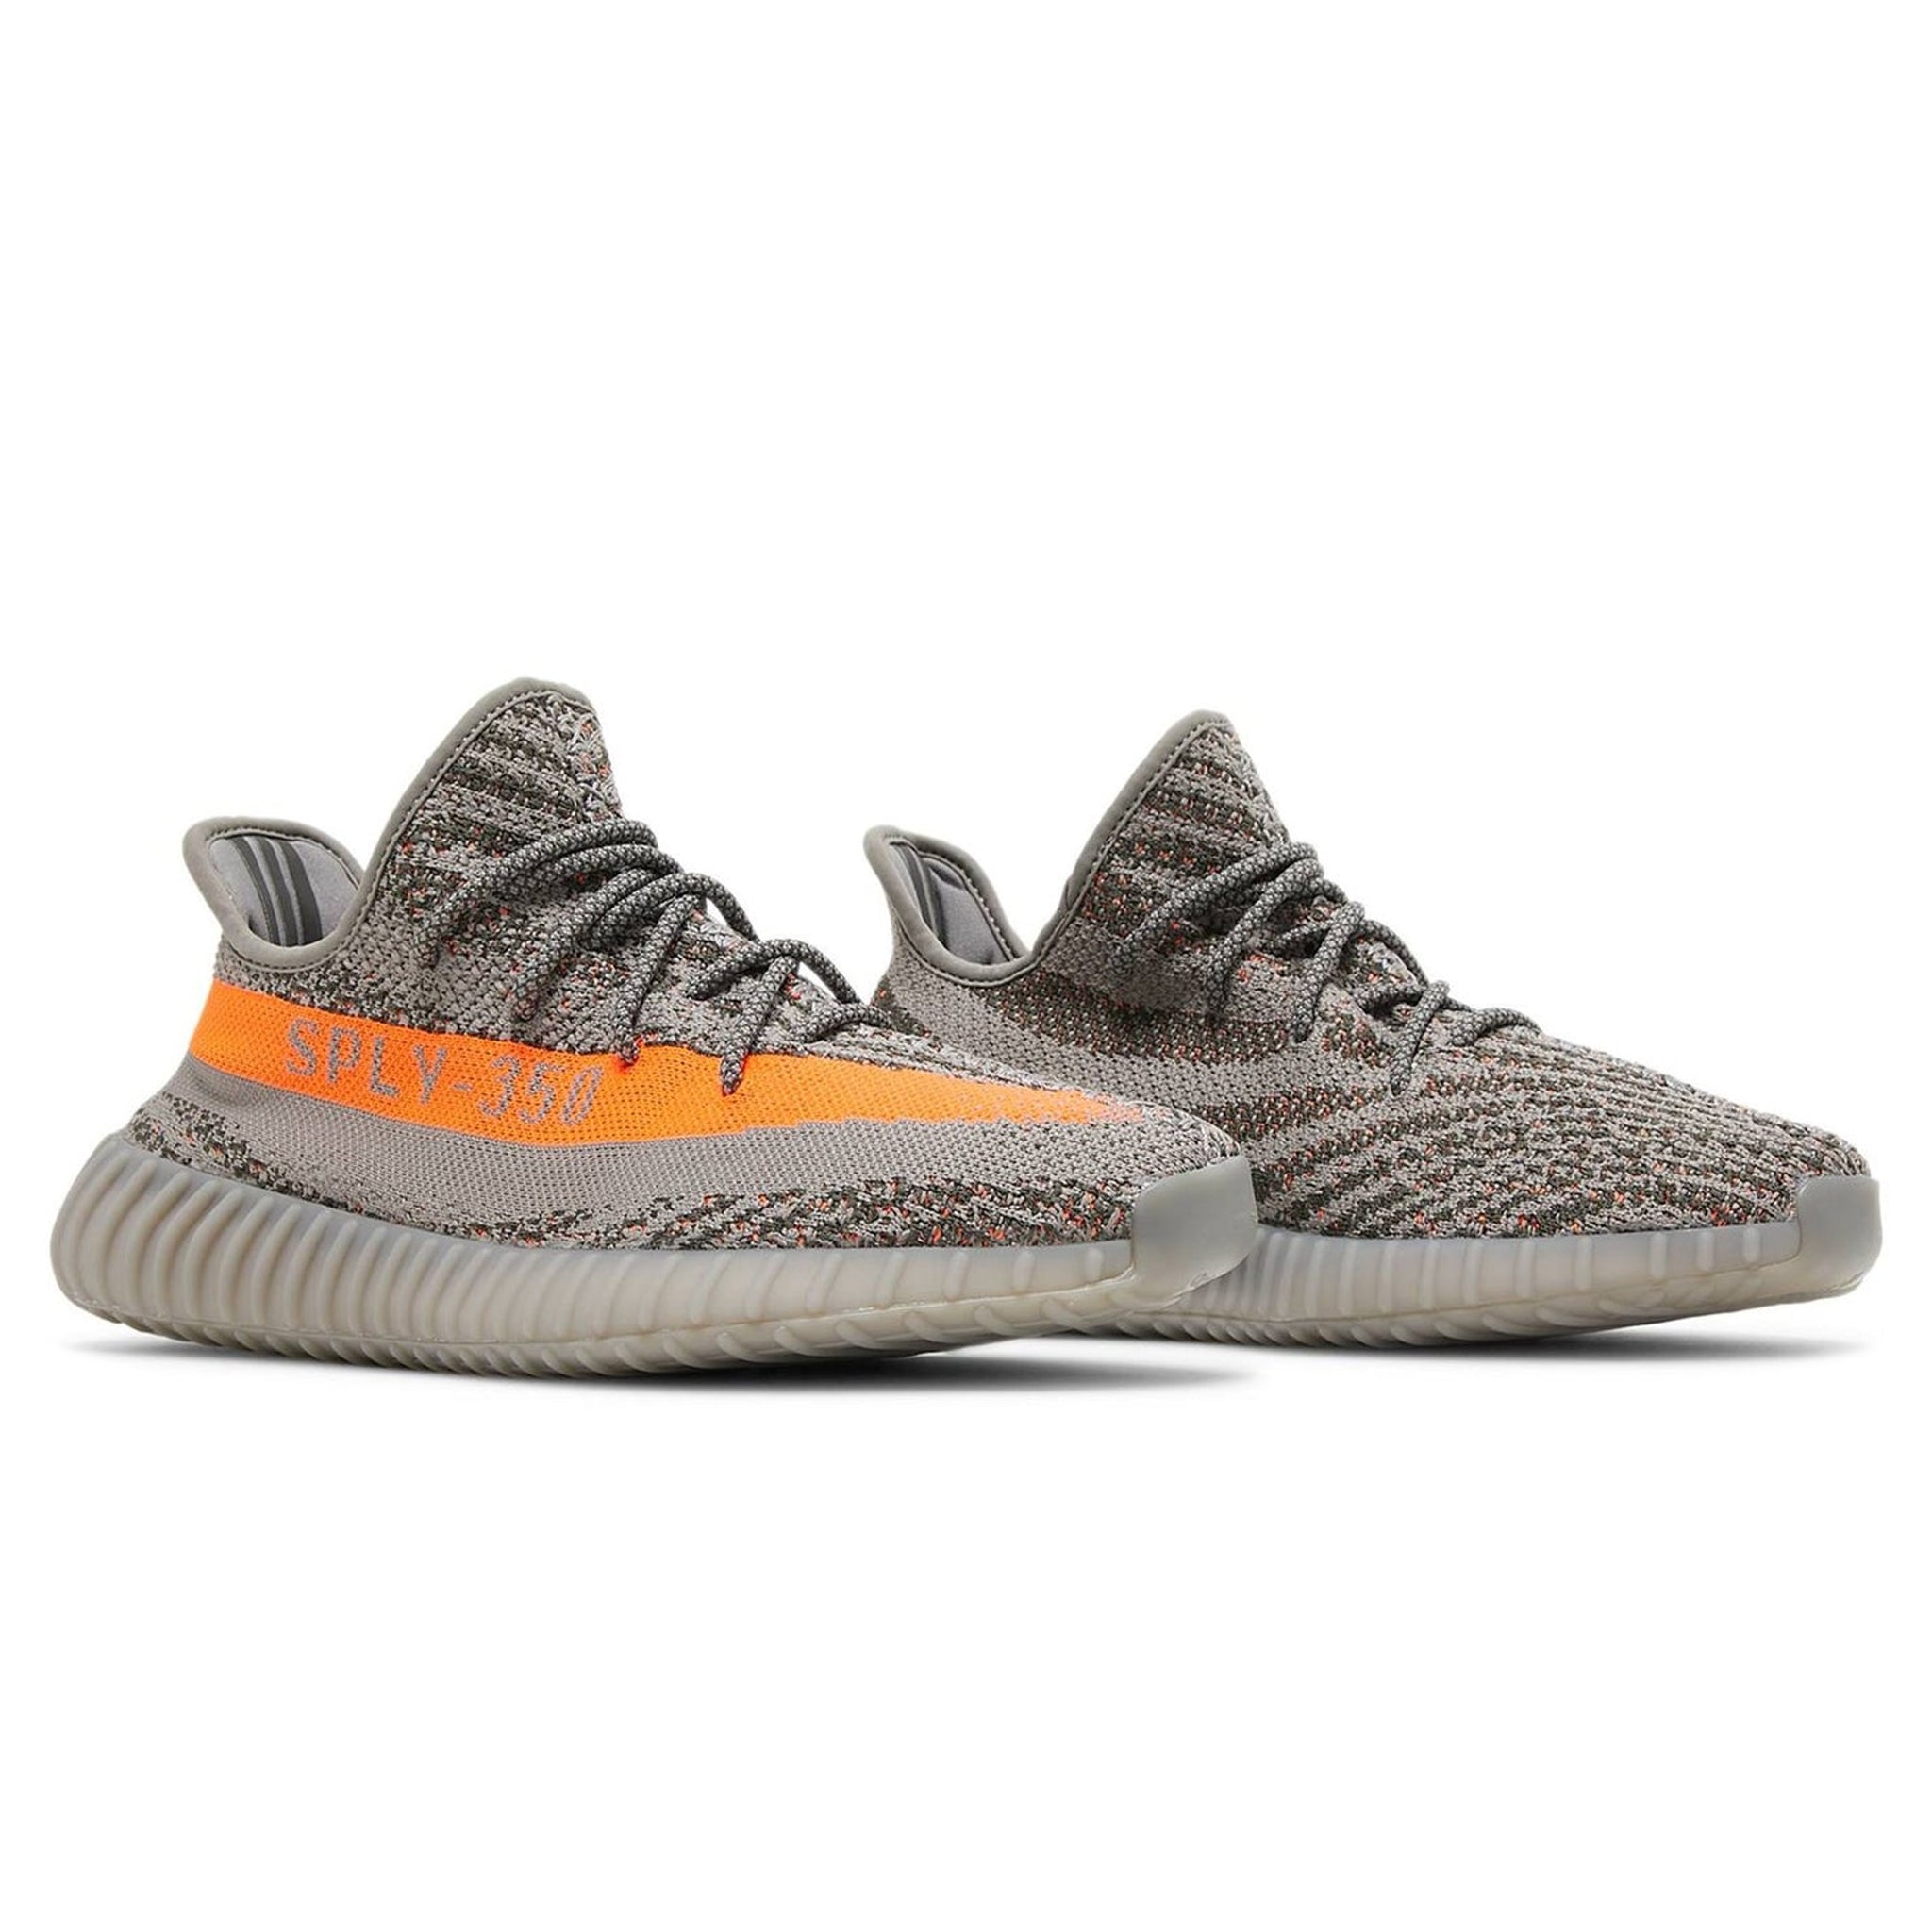 Front side view of Adidas Yeezy Boost 350 V2 Beluga Reflective GW1229